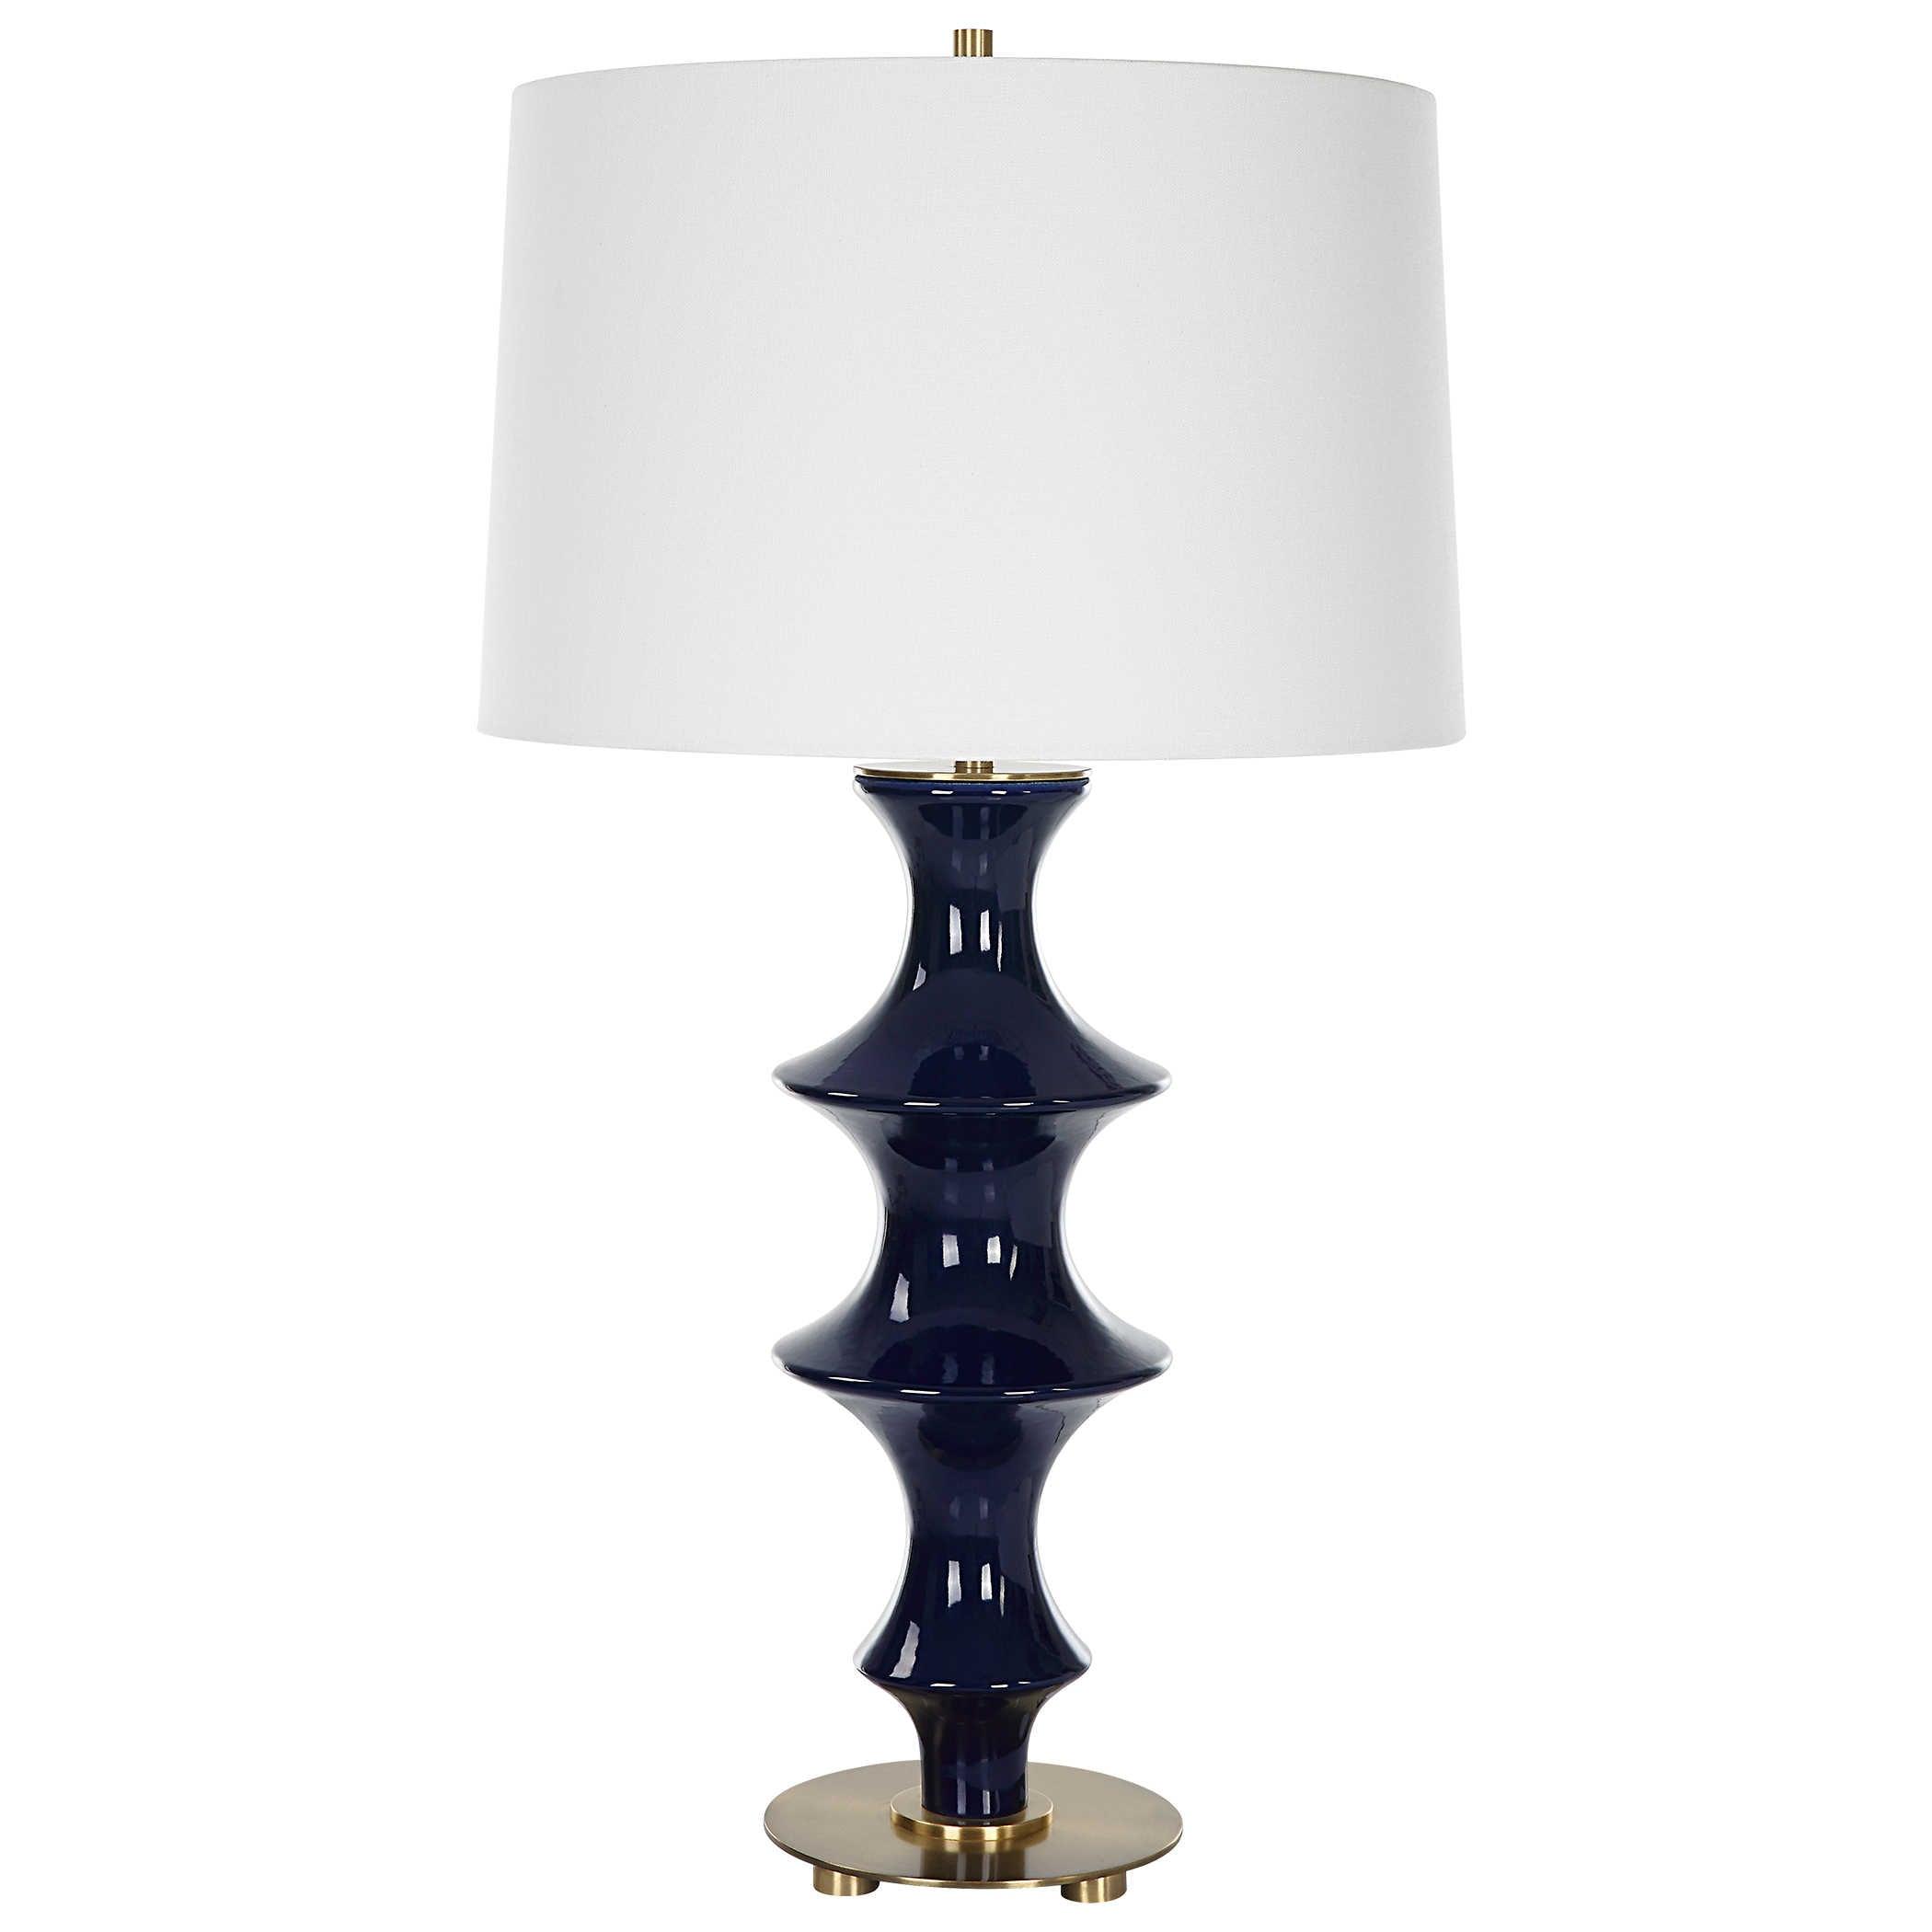 The Uttermost - Coil Table Lamp - 30196 | Montreal Lighting & Hardware